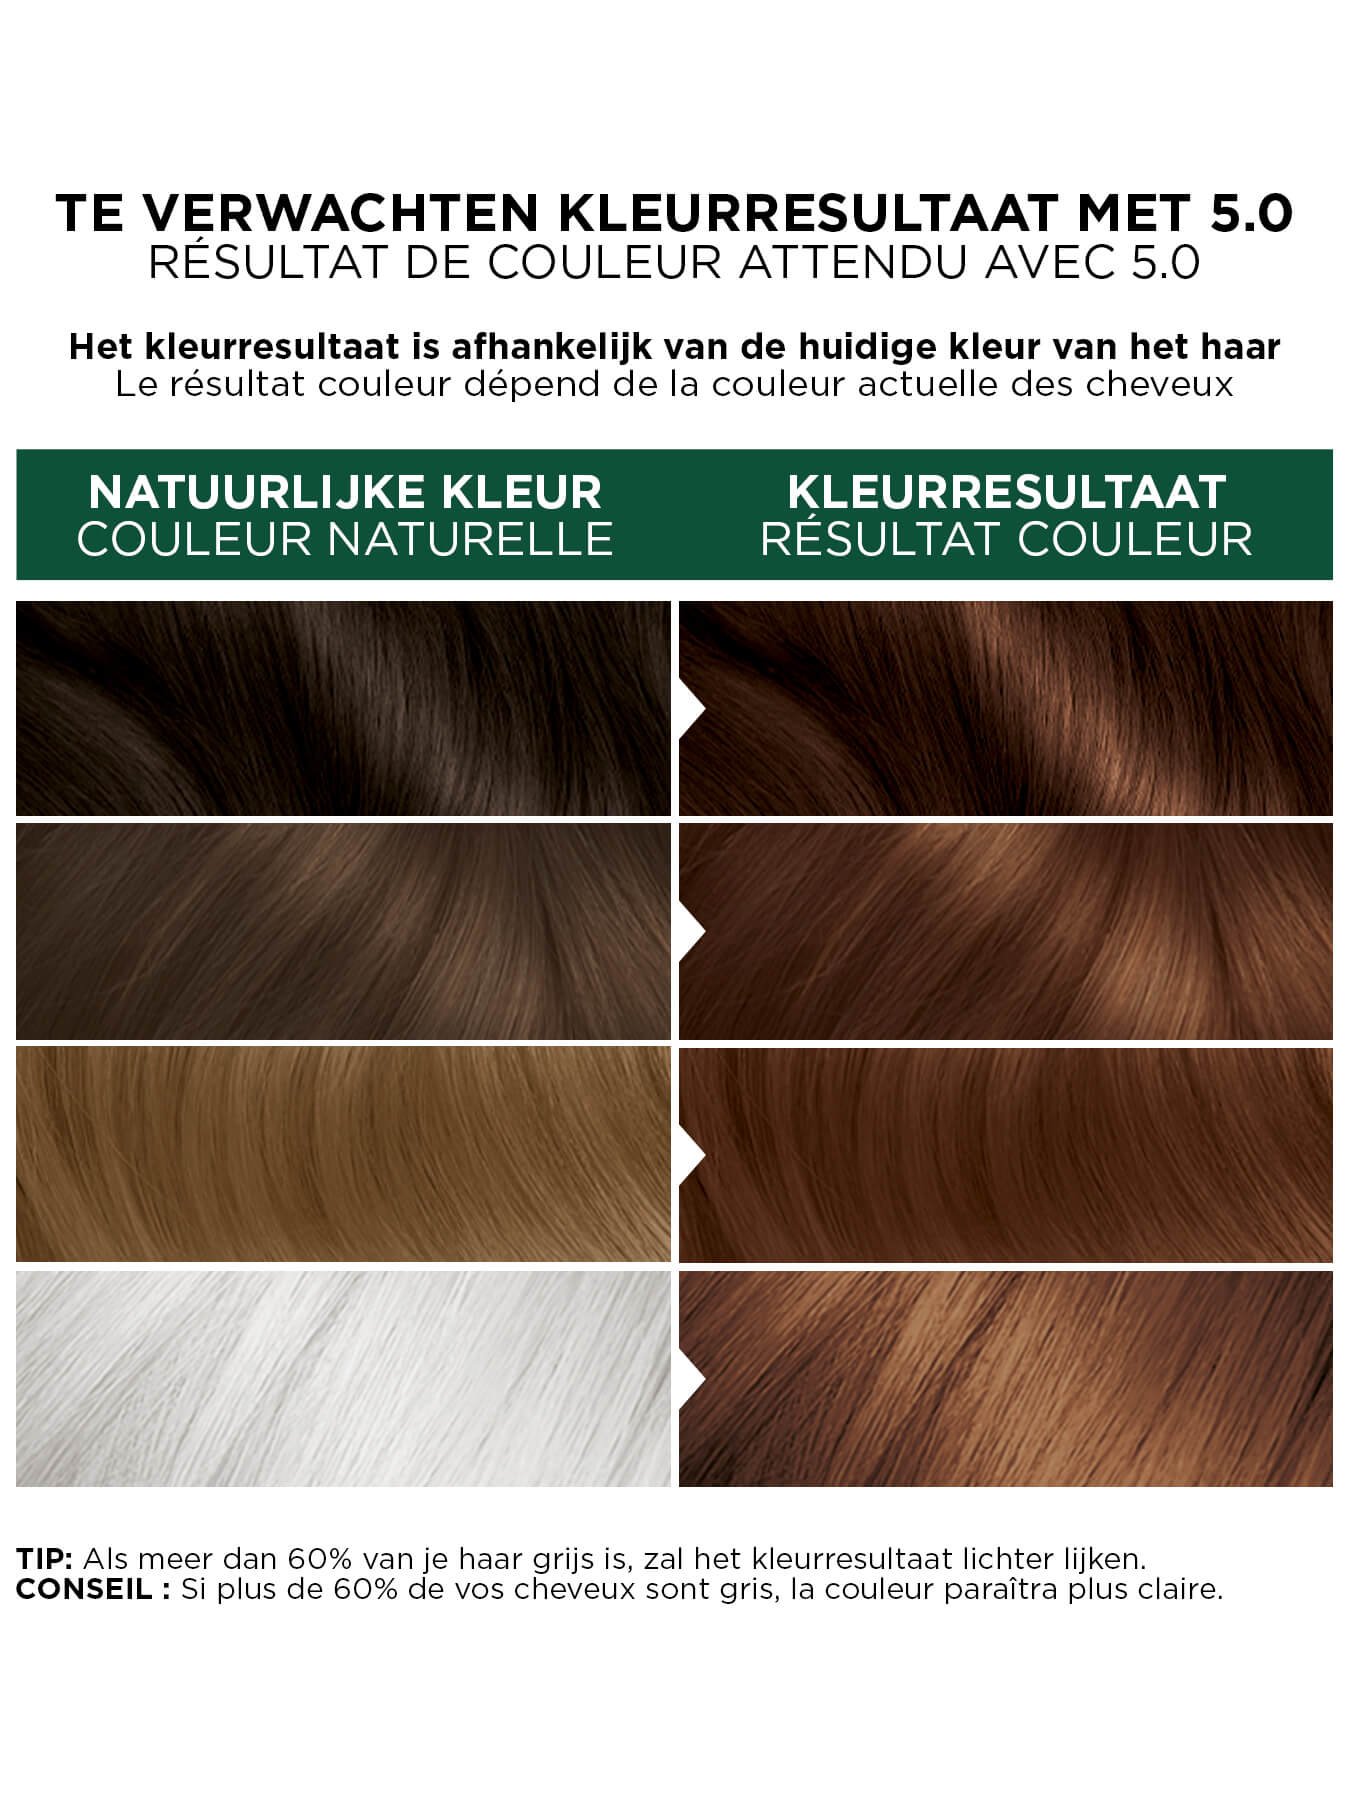 8127170 Belle Color Naturals Resizing 5 0 BE 1350x1800pxjpg master